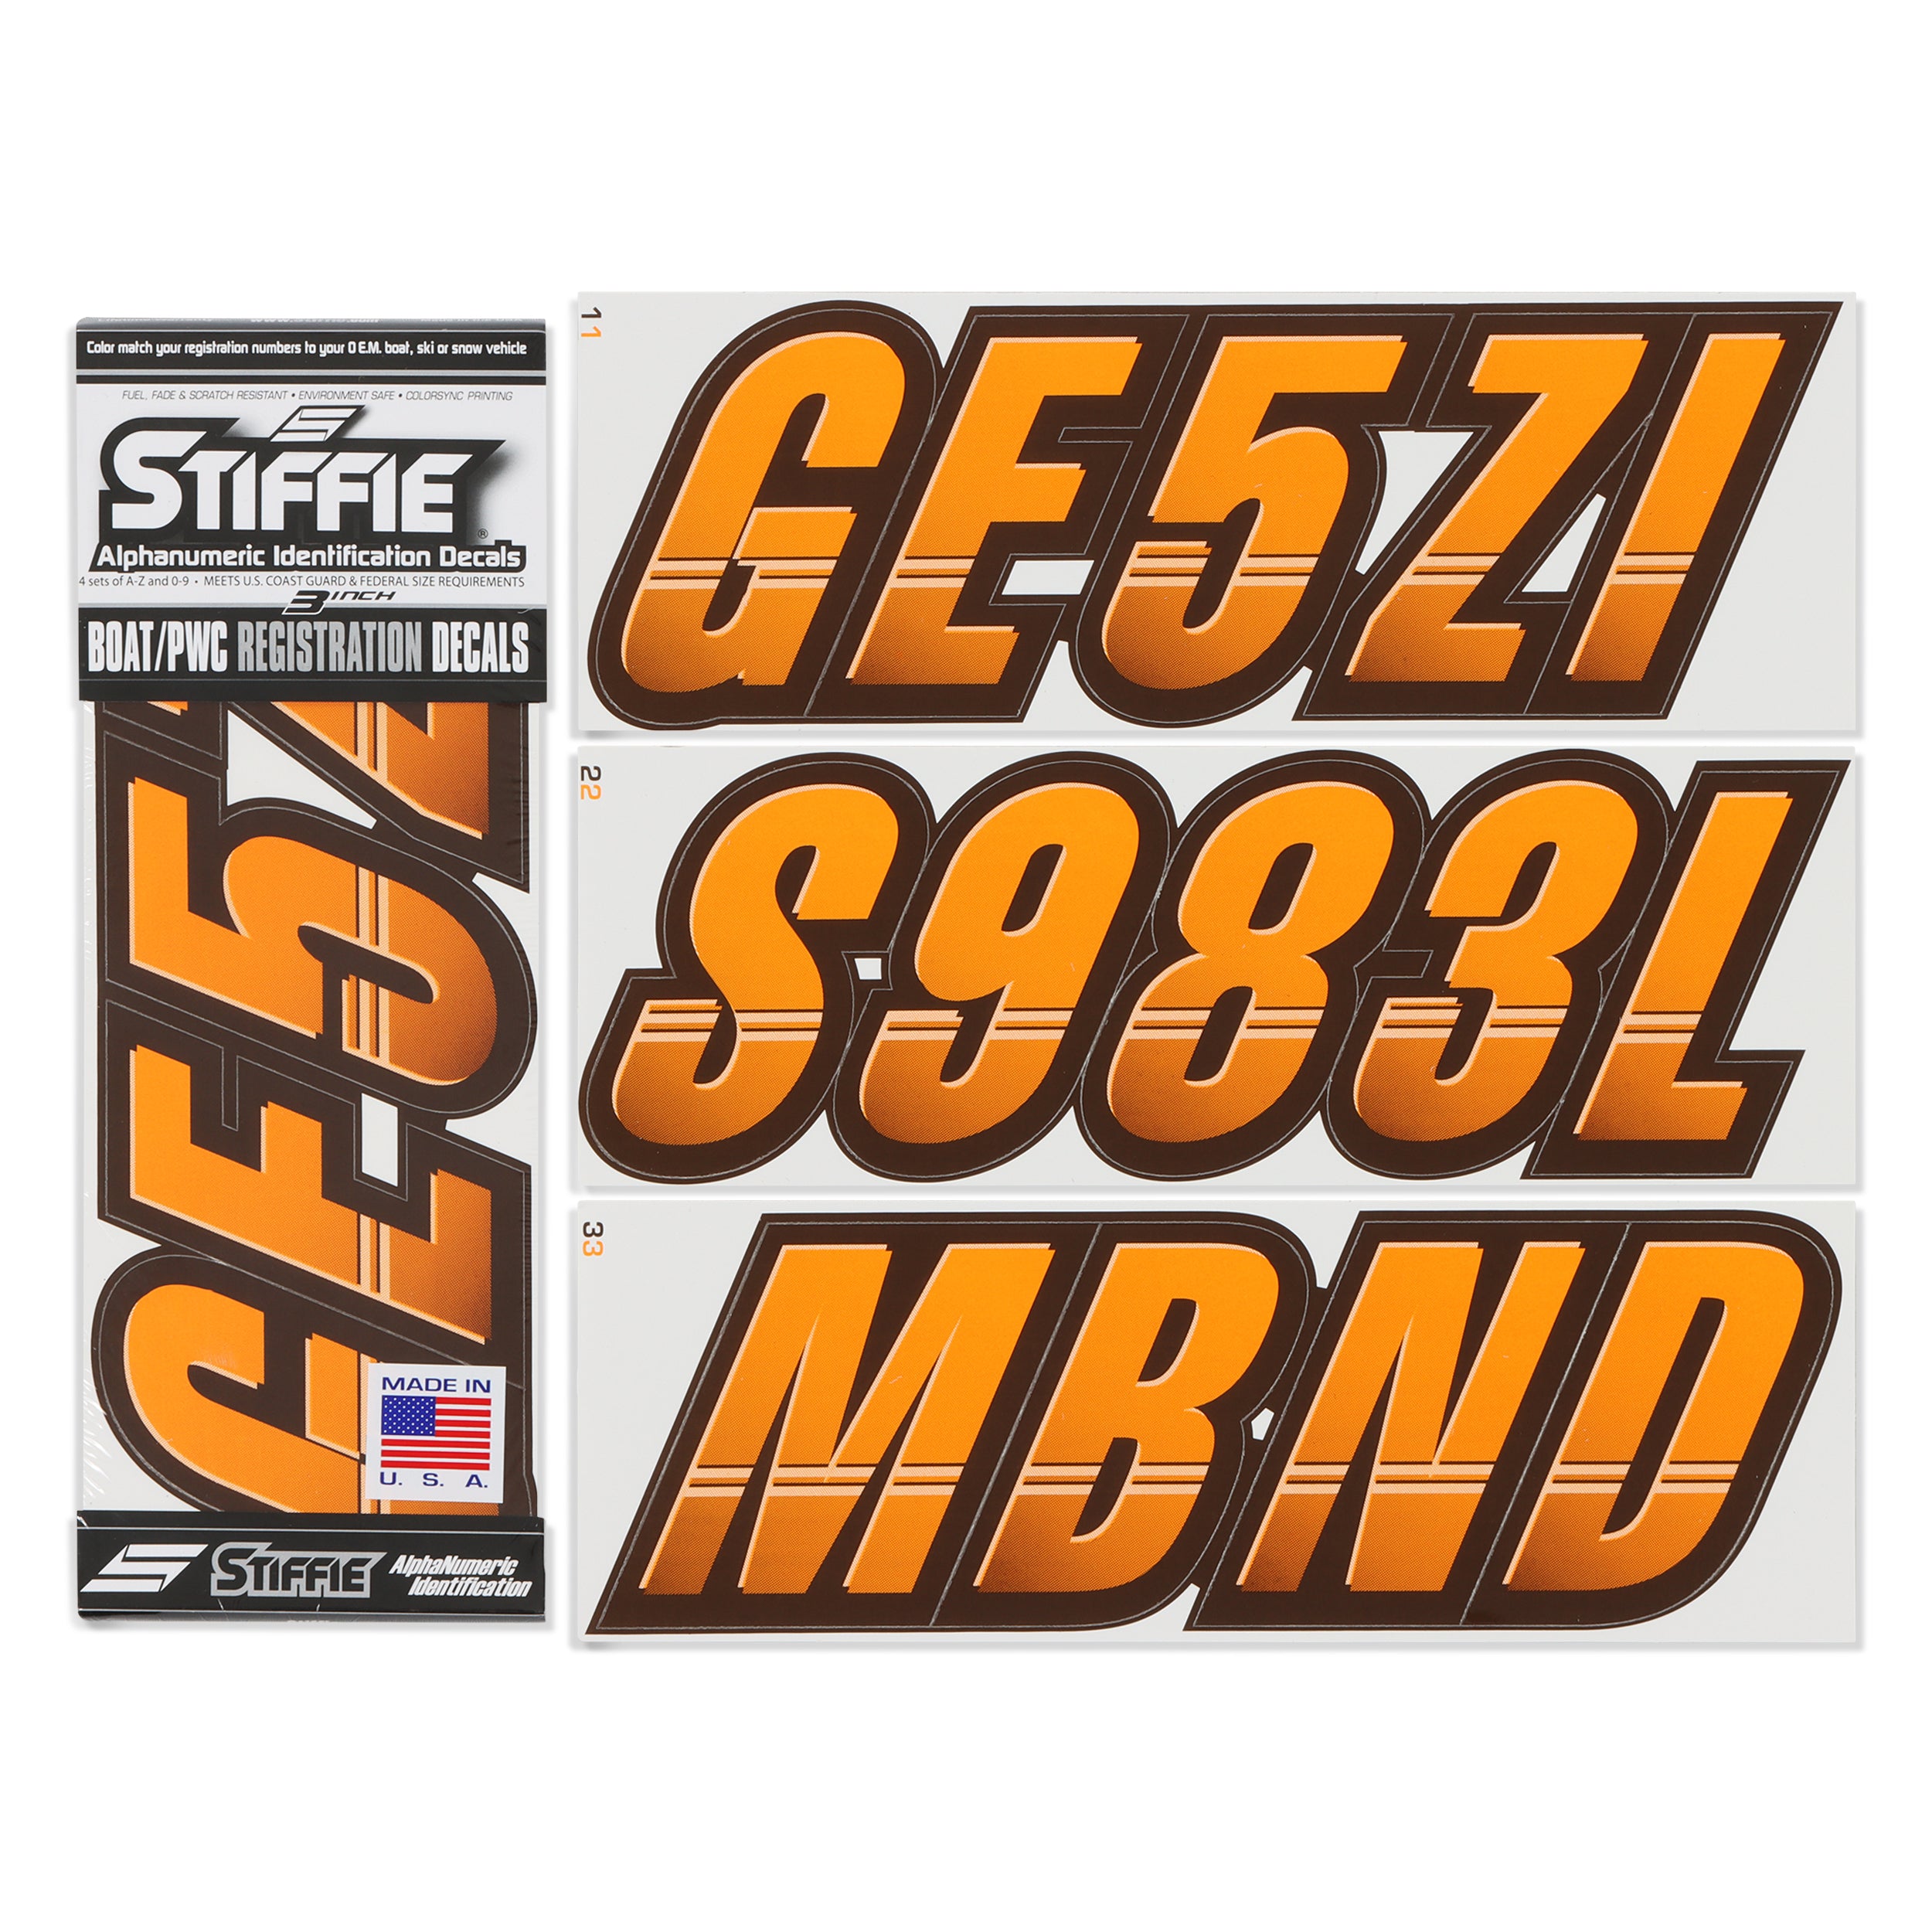 Stiffie Techtron Orange/Brown 3" Alpha-Numeric Registration Identification Numbers Stickers Decals for Boats & Personal Watercraft